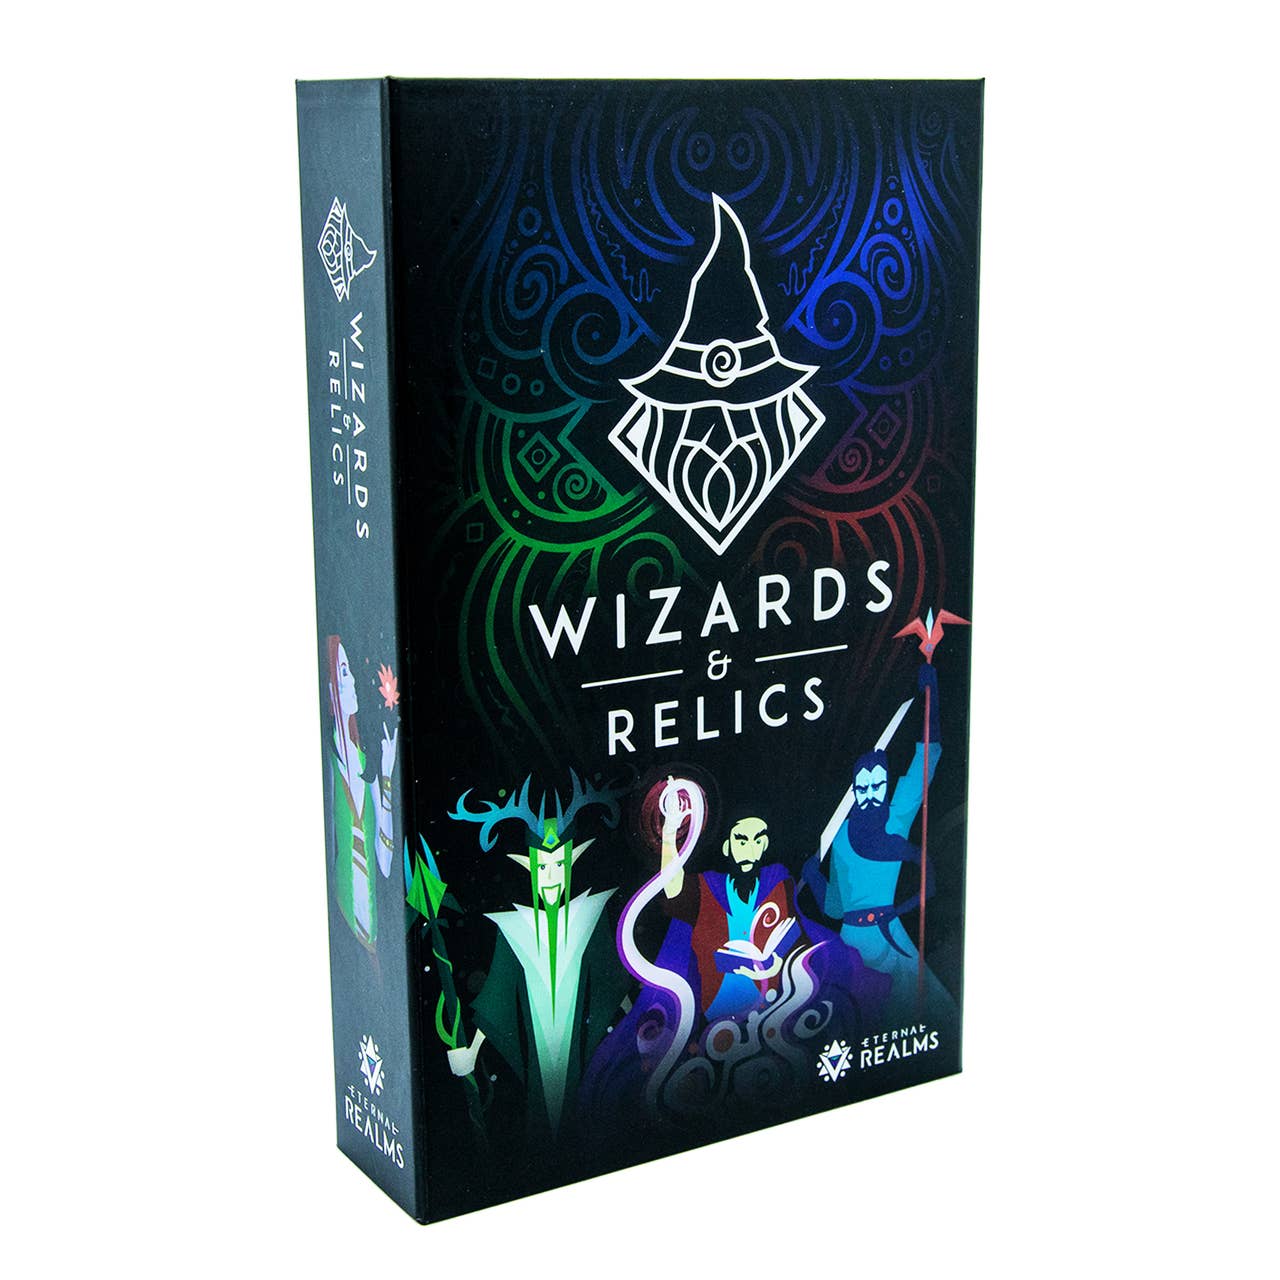 Wizards & Relics - Bards & Cards